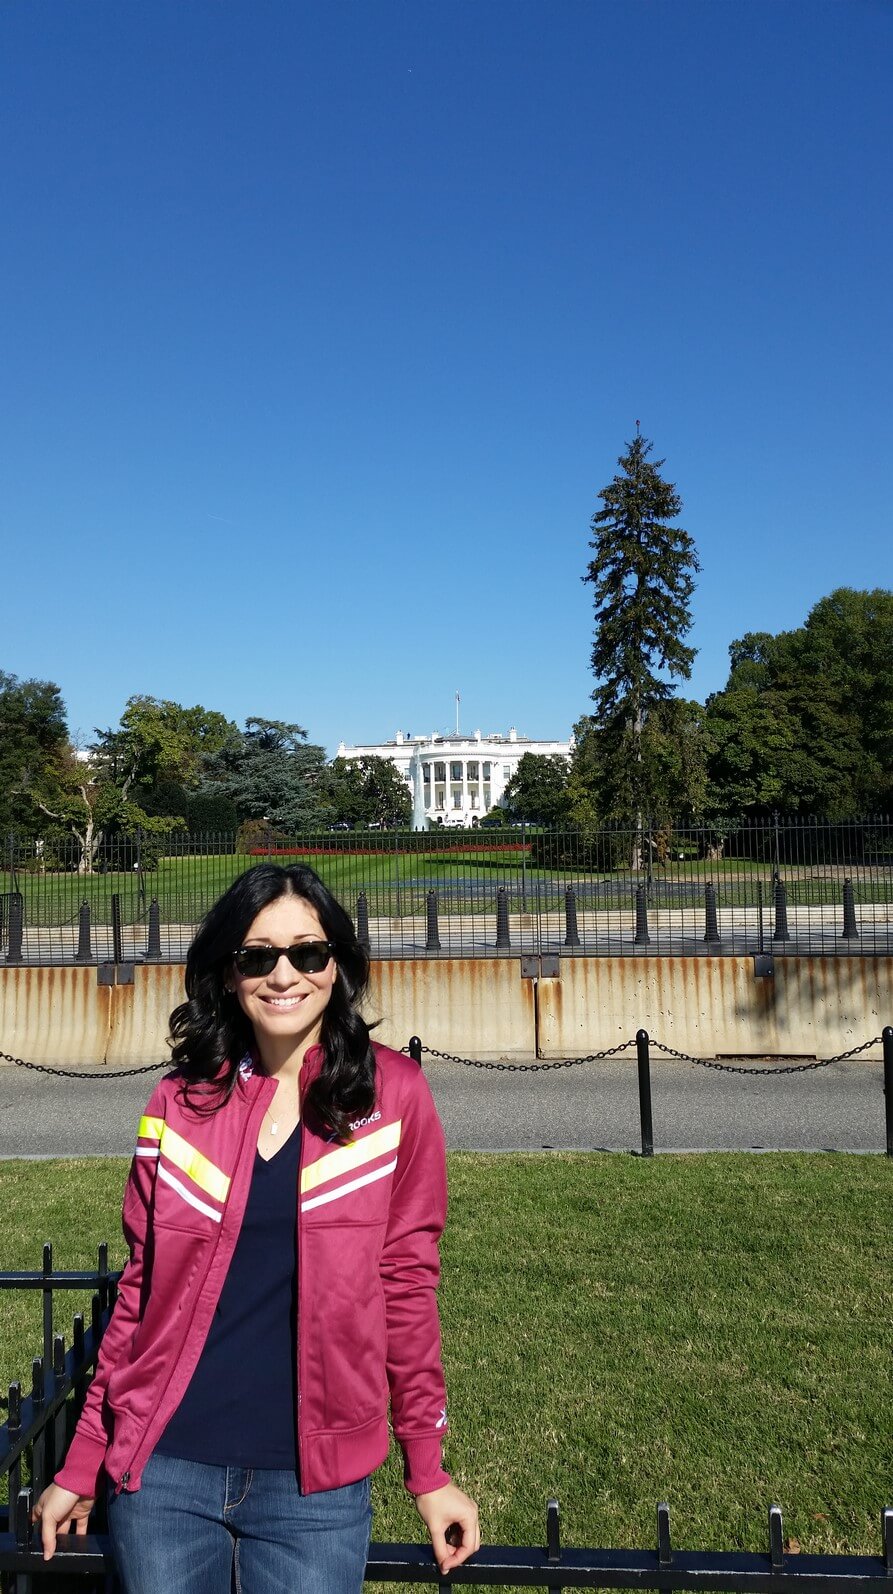 Taking my new jacket for a stroll by the White House--nbd.